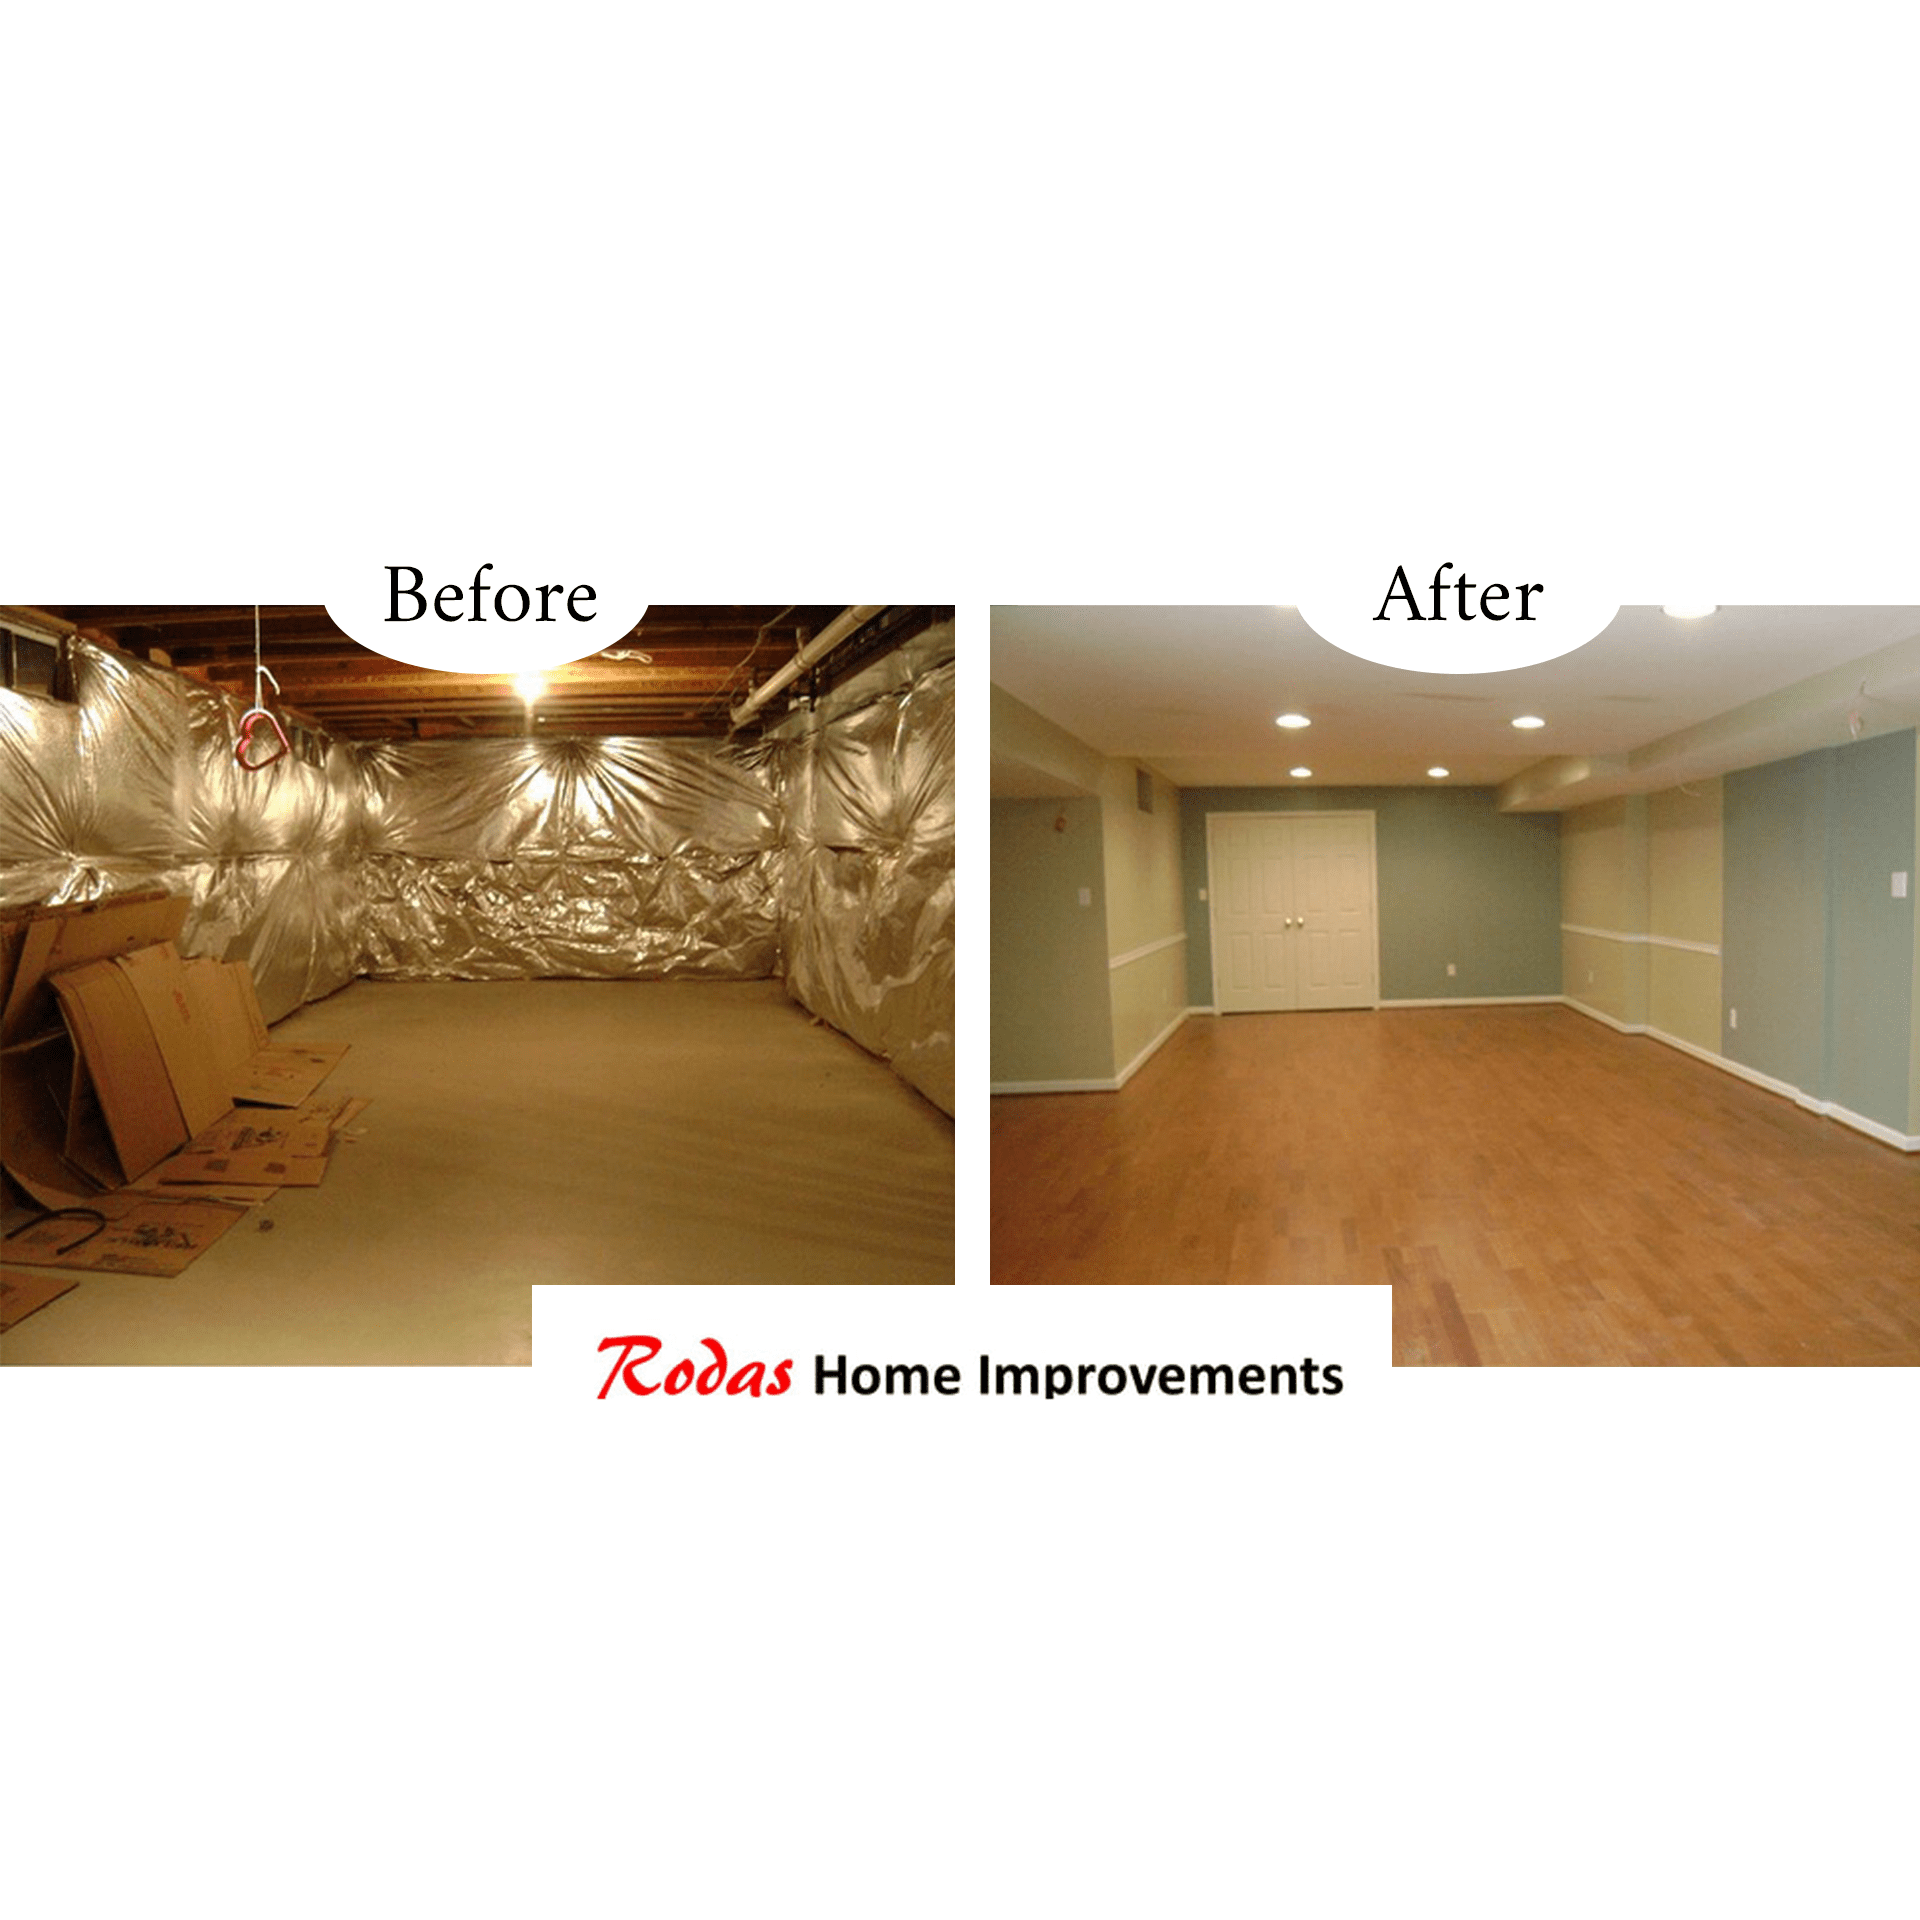 Before and After Interior Remodeling